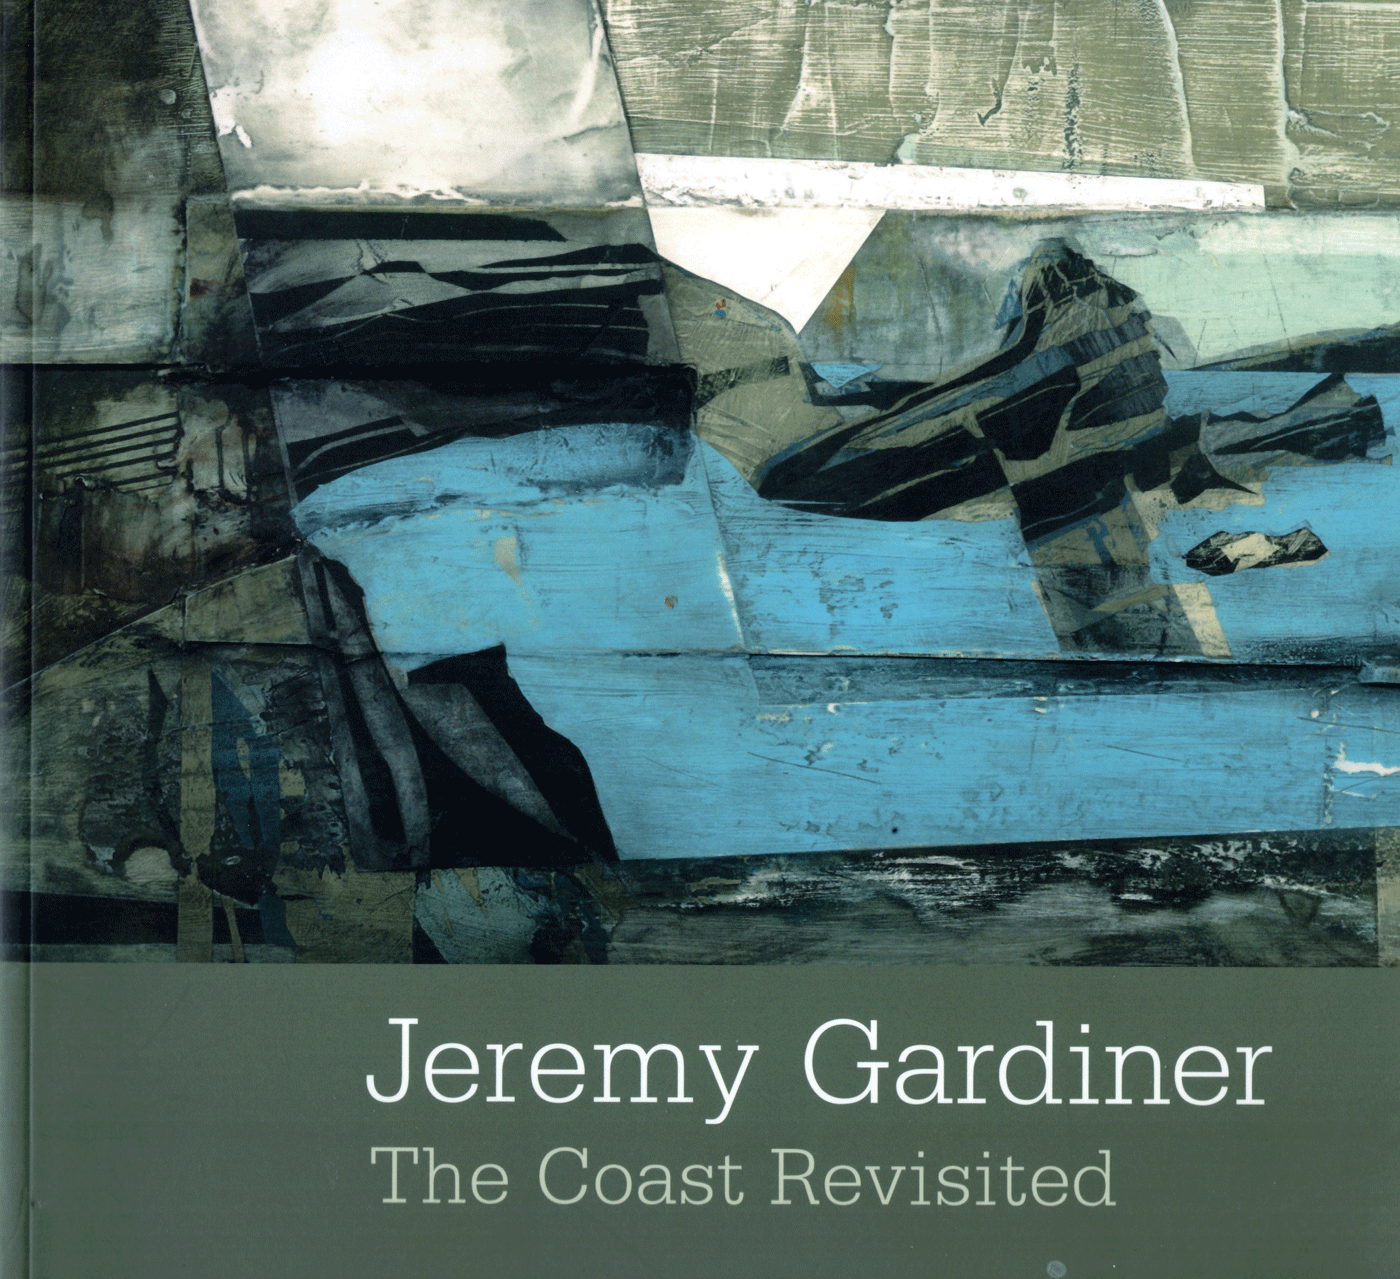 The book cover of The Coast Revisited by Jeremy Gardiner